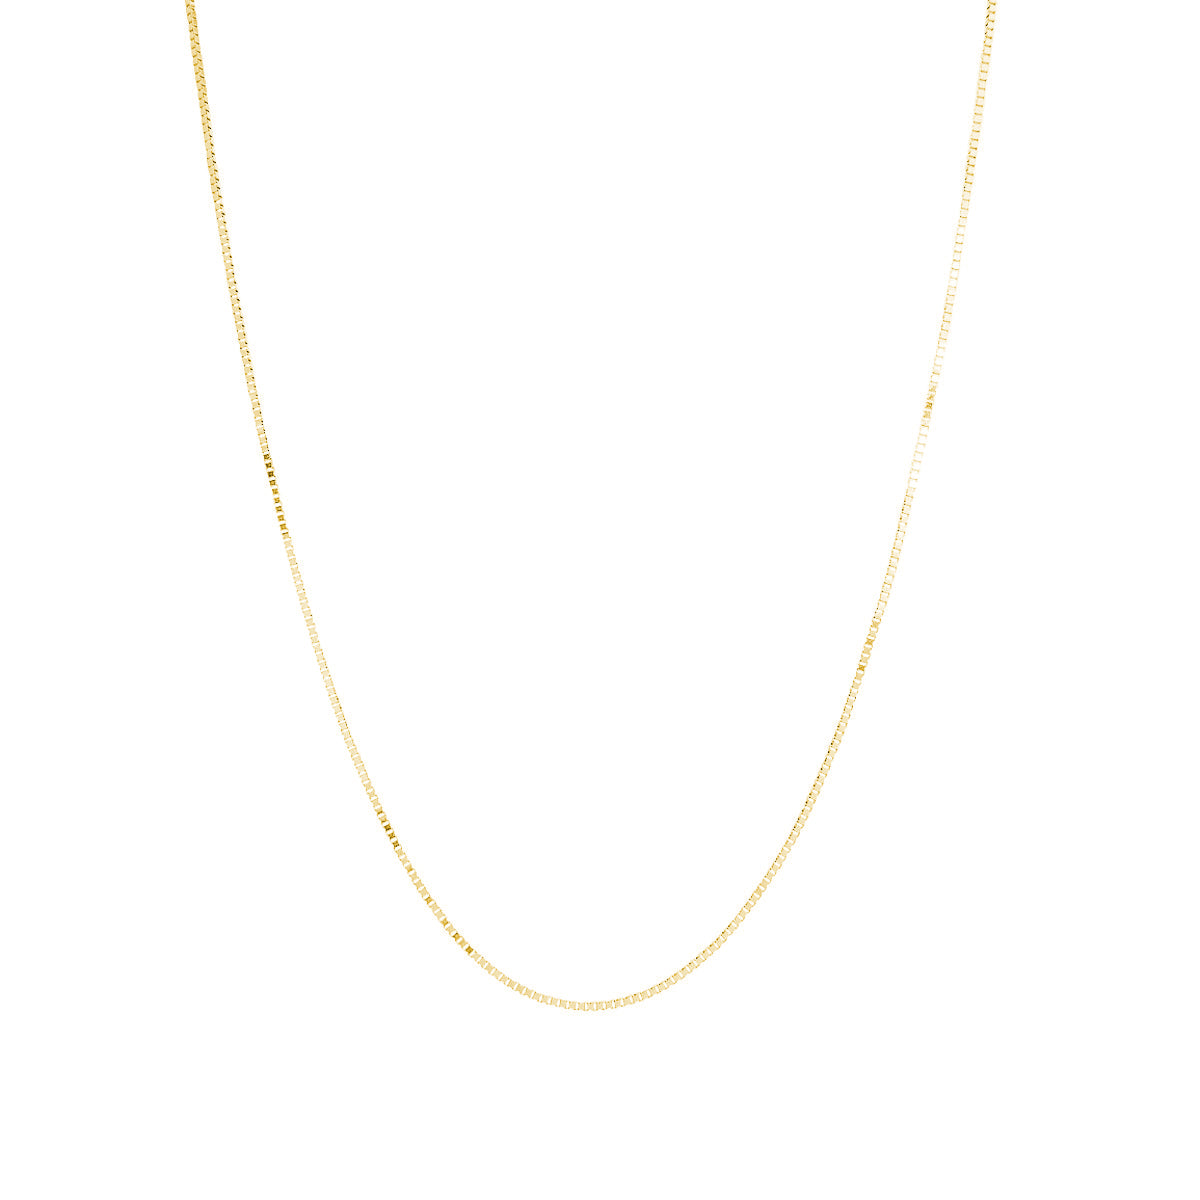 Fink's Jewelers .8mm Box Chain Necklace in 14K Yellow Gold